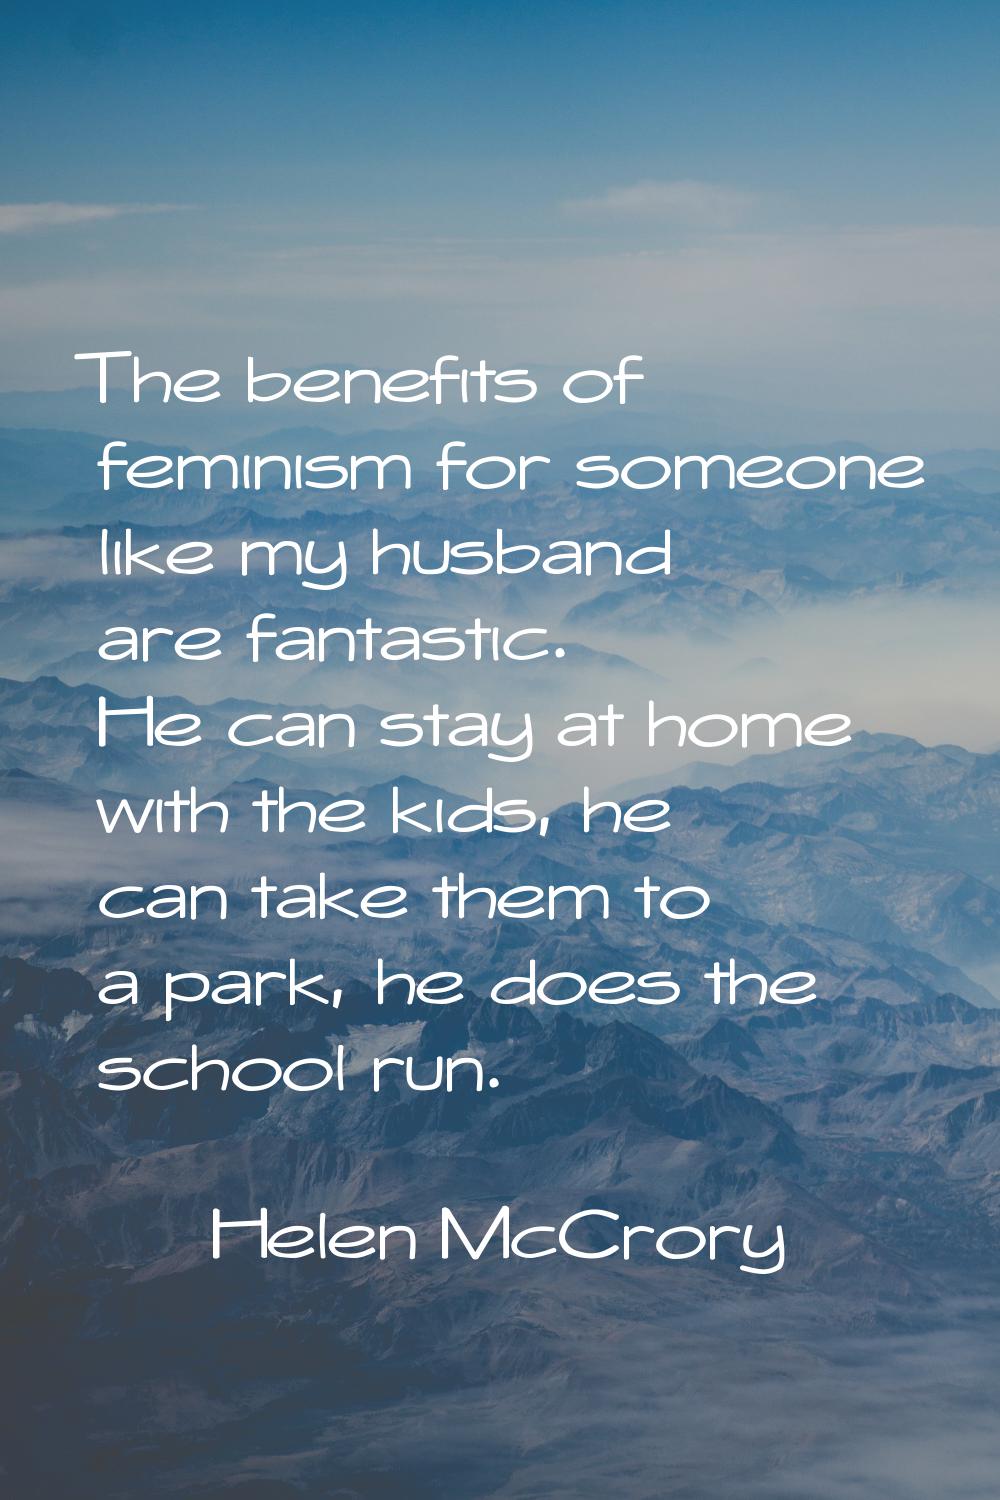 The benefits of feminism for someone like my husband are fantastic. He can stay at home with the ki